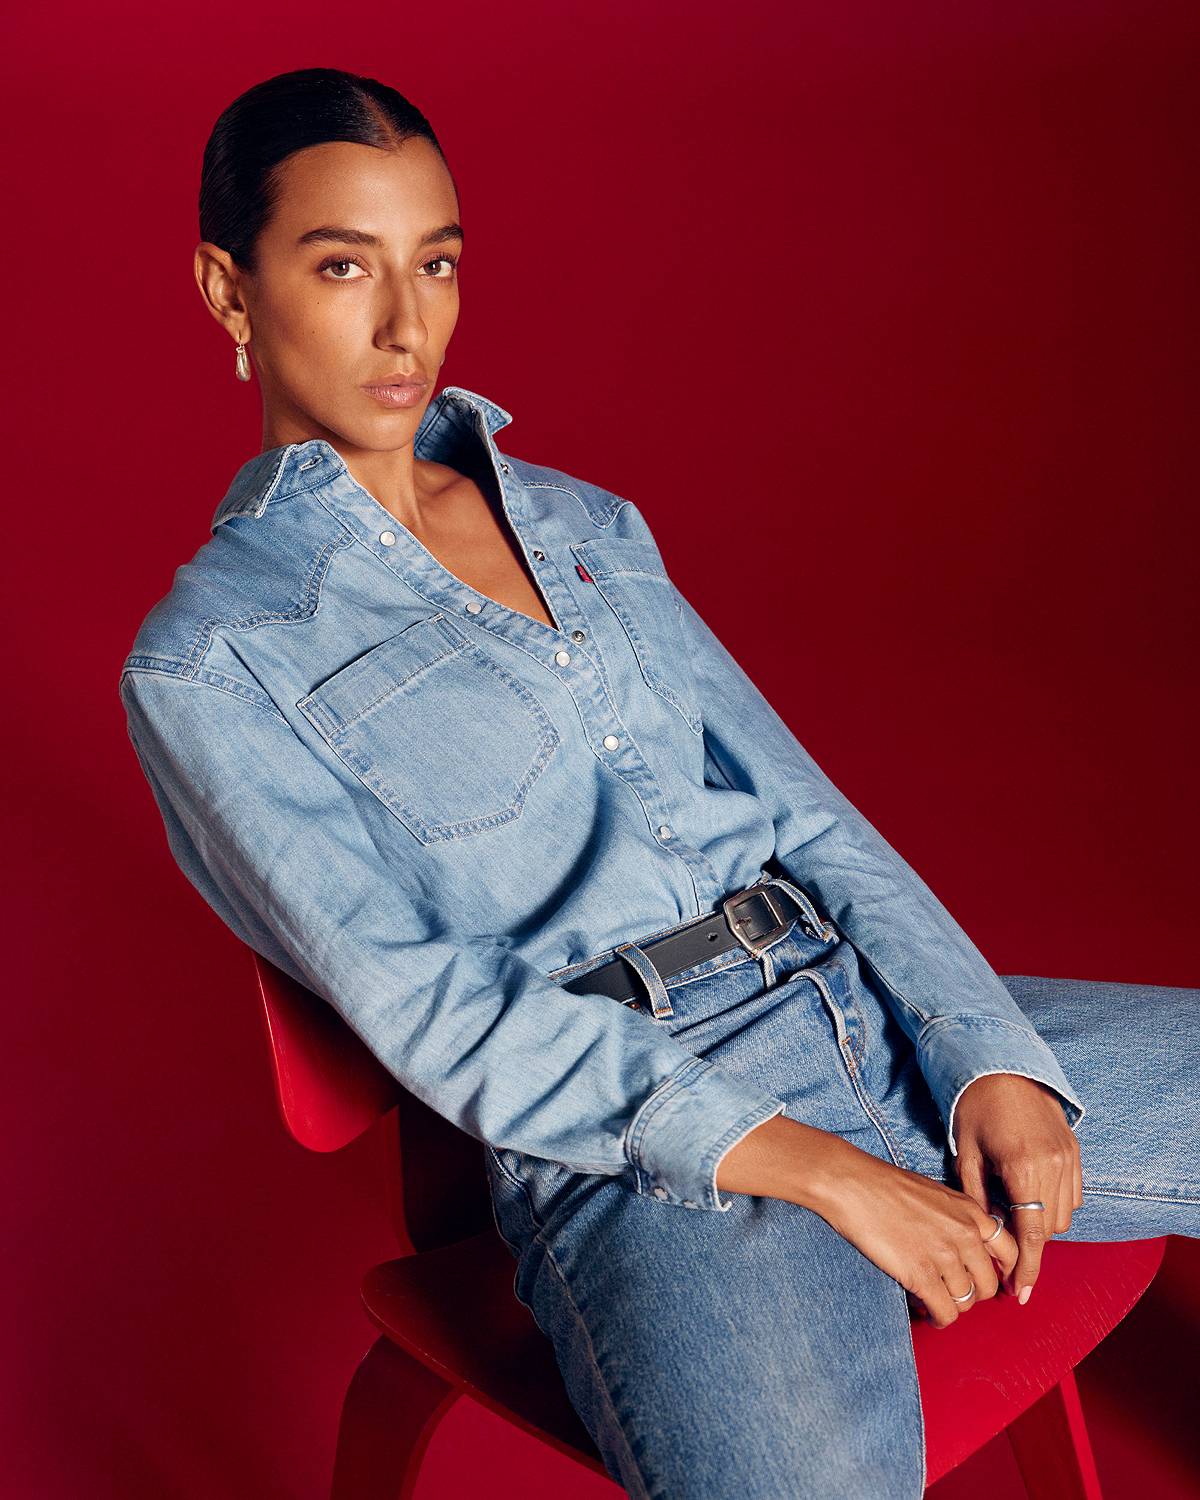 Model in women's denim western button-up against a red background